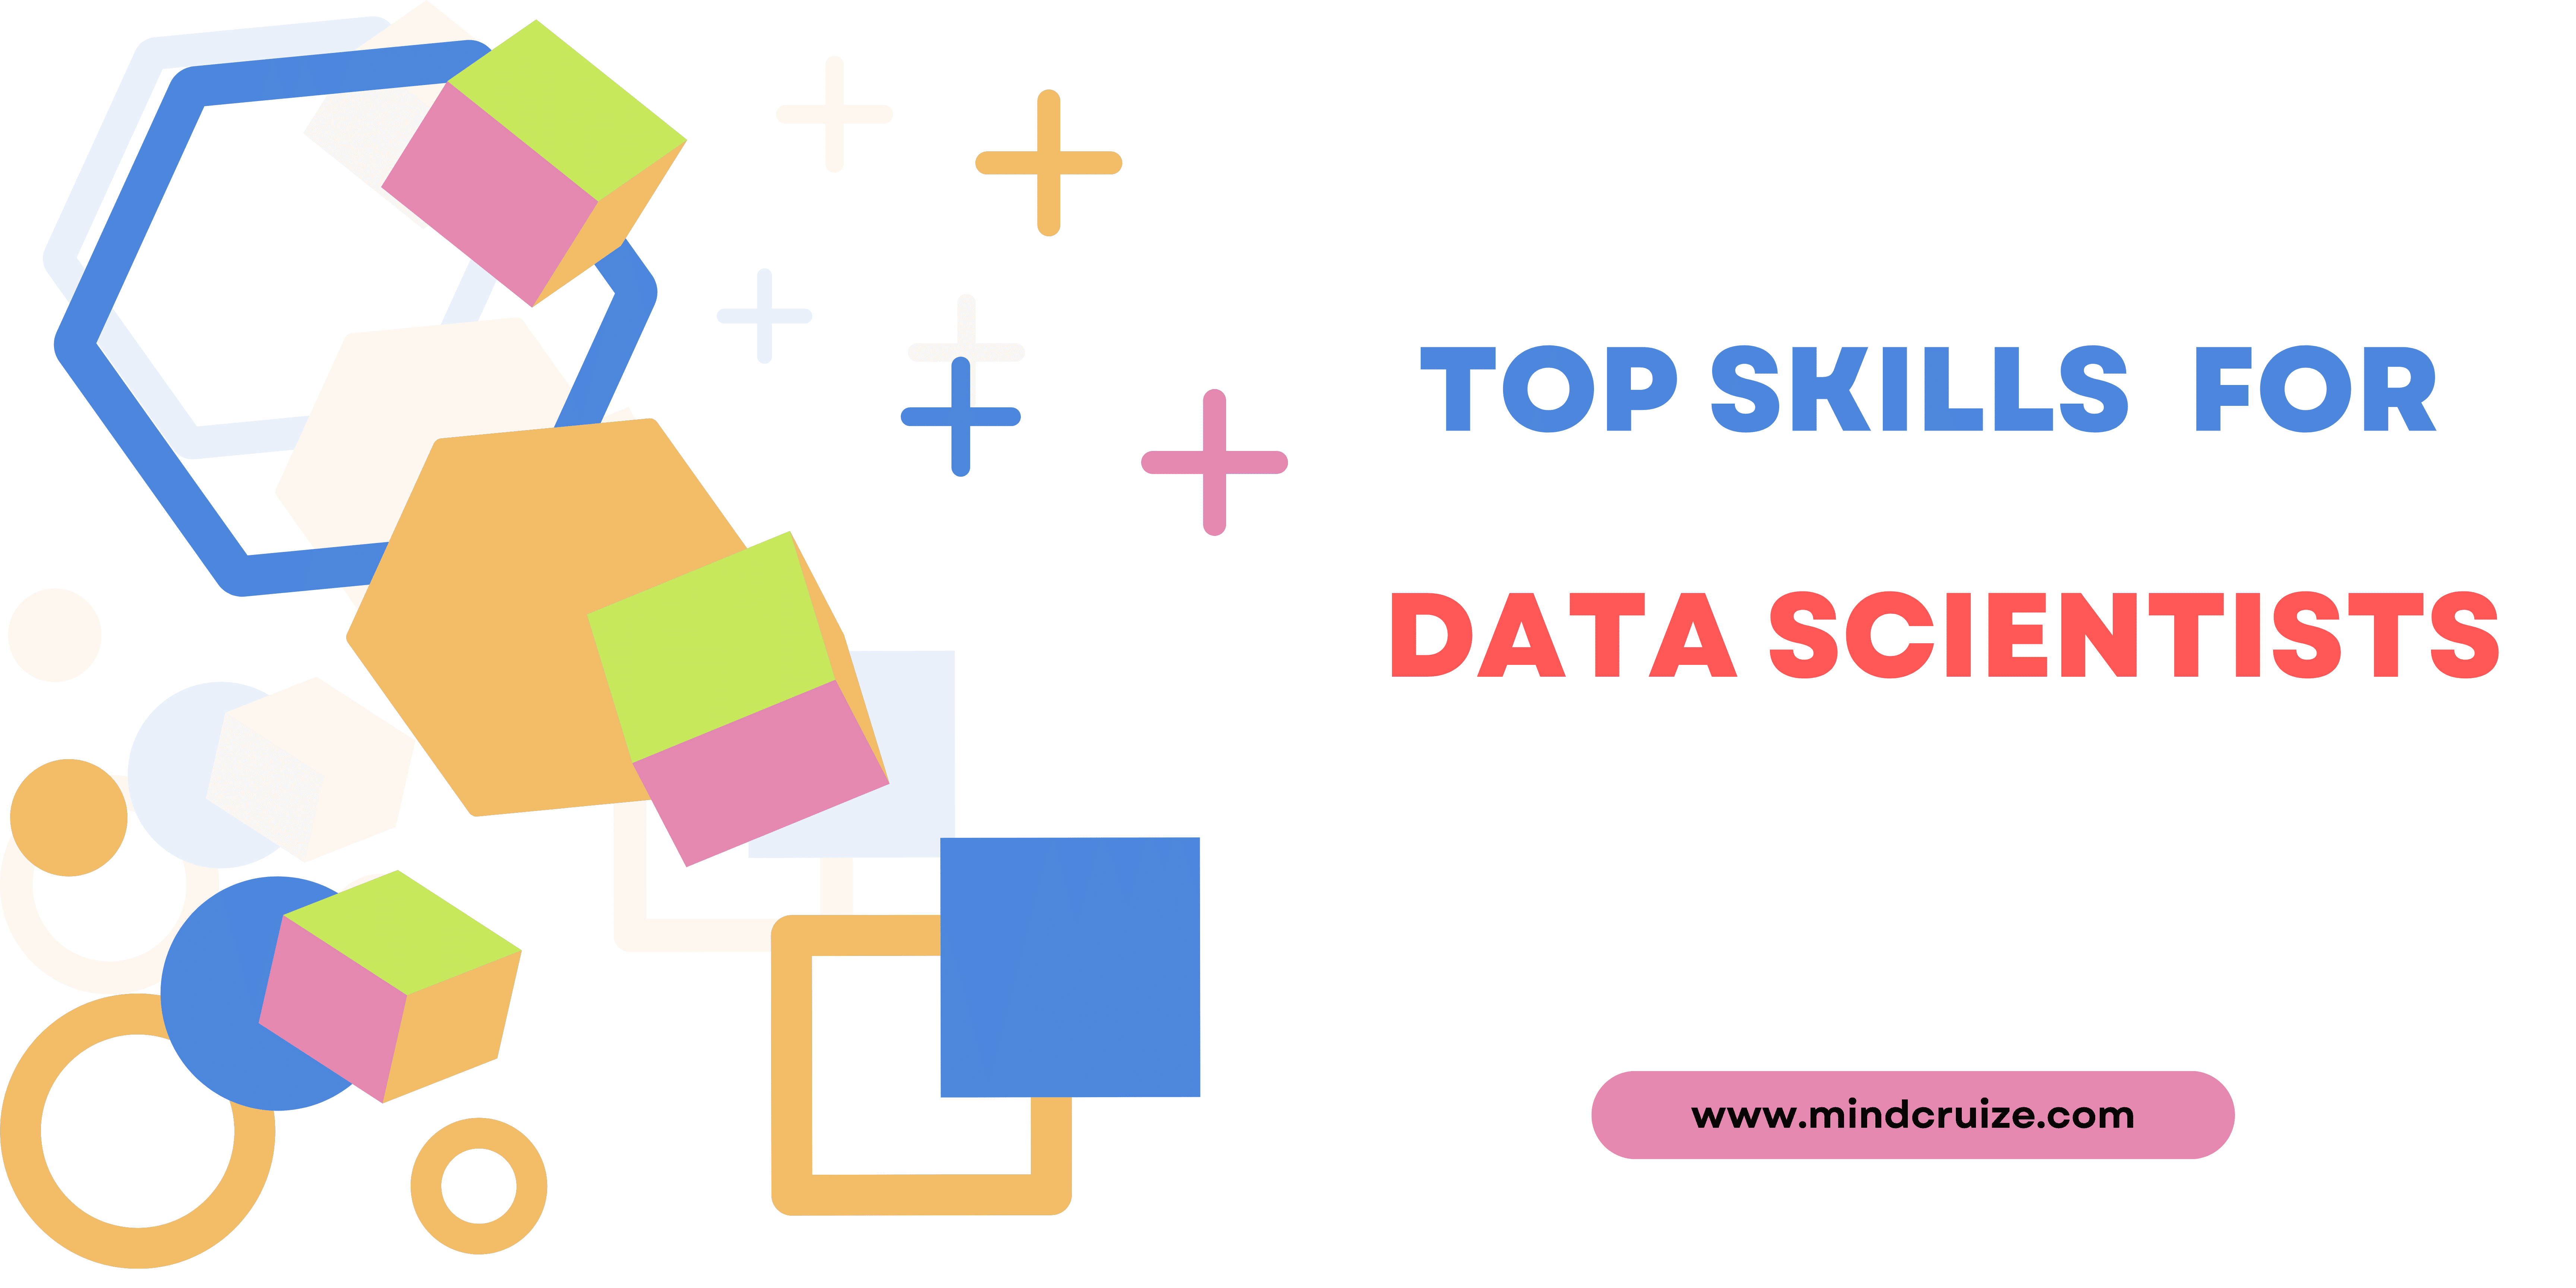 Top Skills for Data Scientists